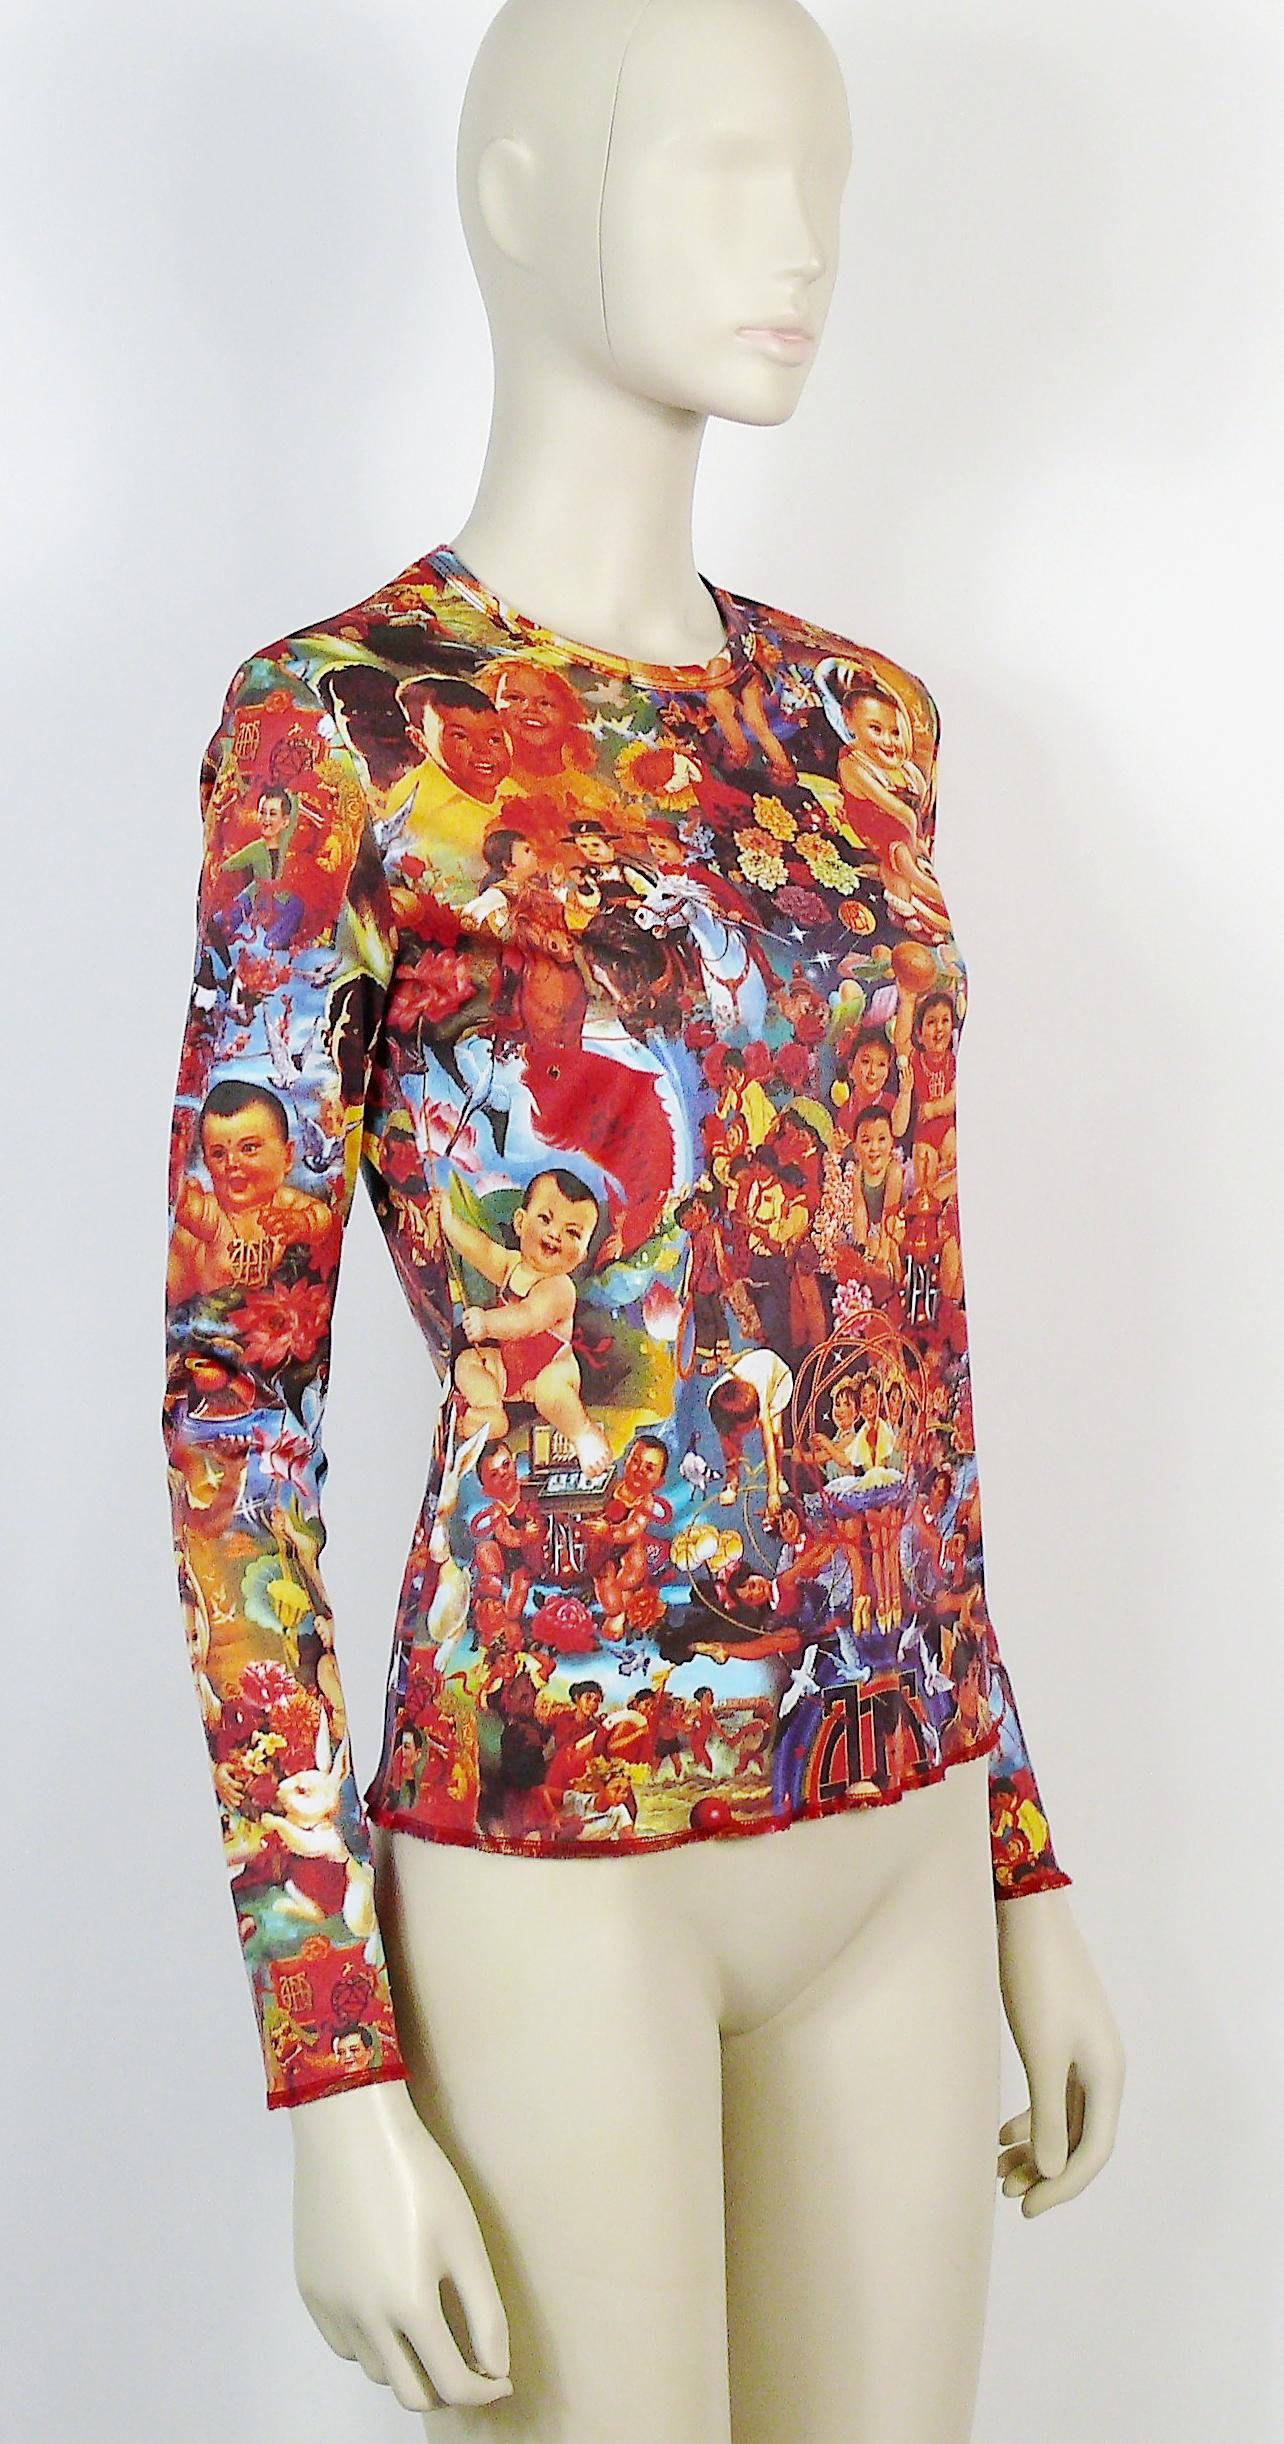 JEAN PAUL GAULTIER vintage multicolour Chinese propaganda print top featuring babies and children.

Round neck.
Long sleeves.

Label reads JPG JEAN'S Made in Italy.
Collection n°0002.

Size tag reads : XL.

Composition tag reads : 100%